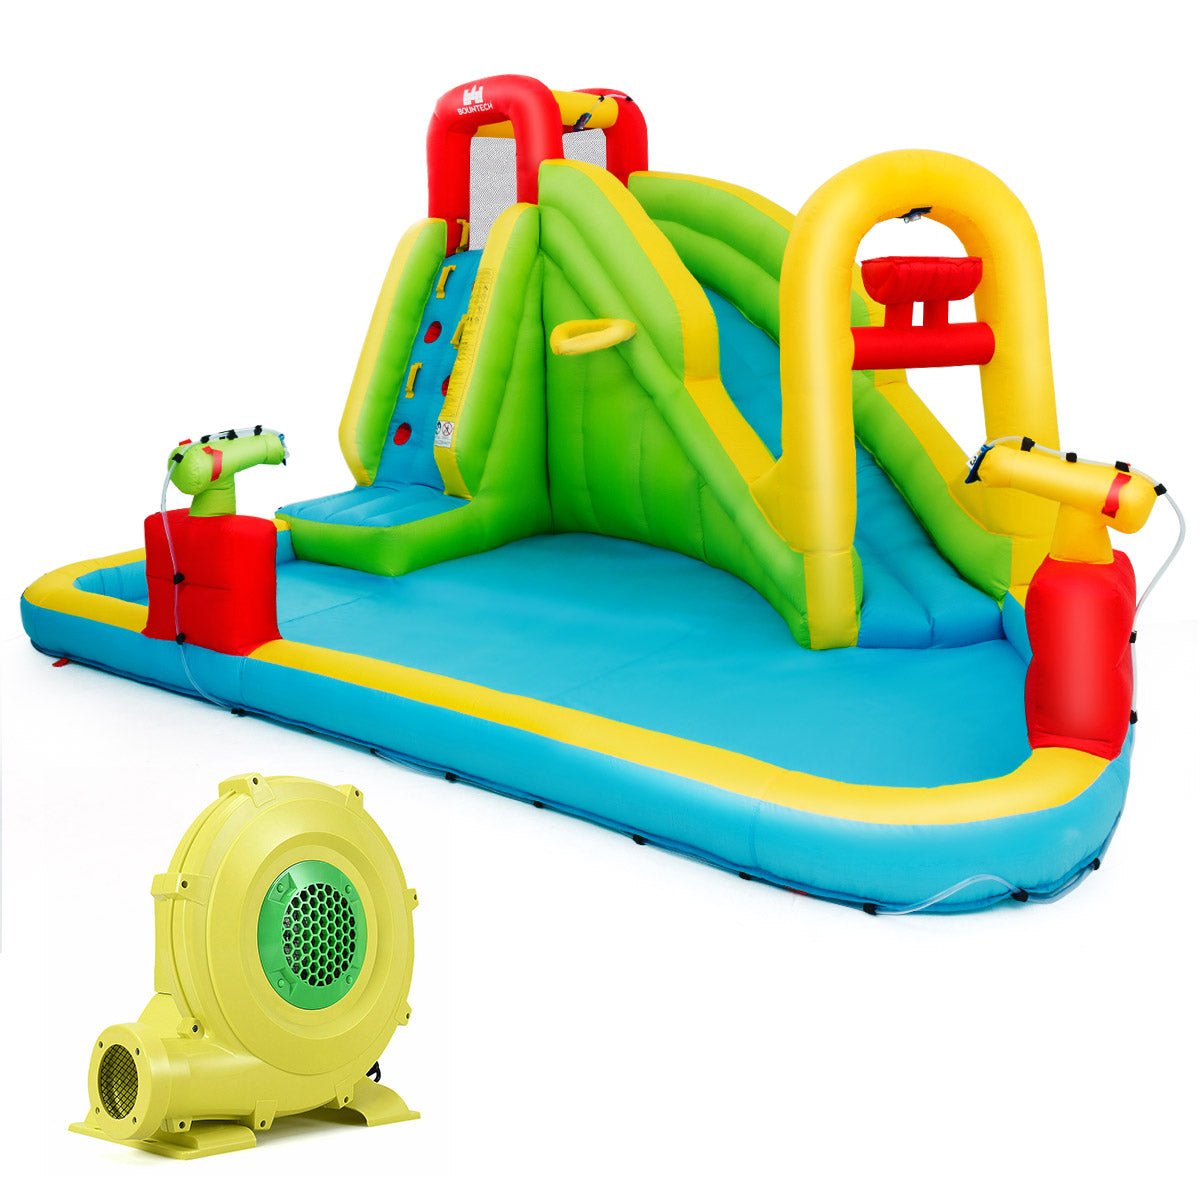 Aquatic Adventure: Inflatable Water Slide with Pool, Climbing Wall, Water Gun & Blower